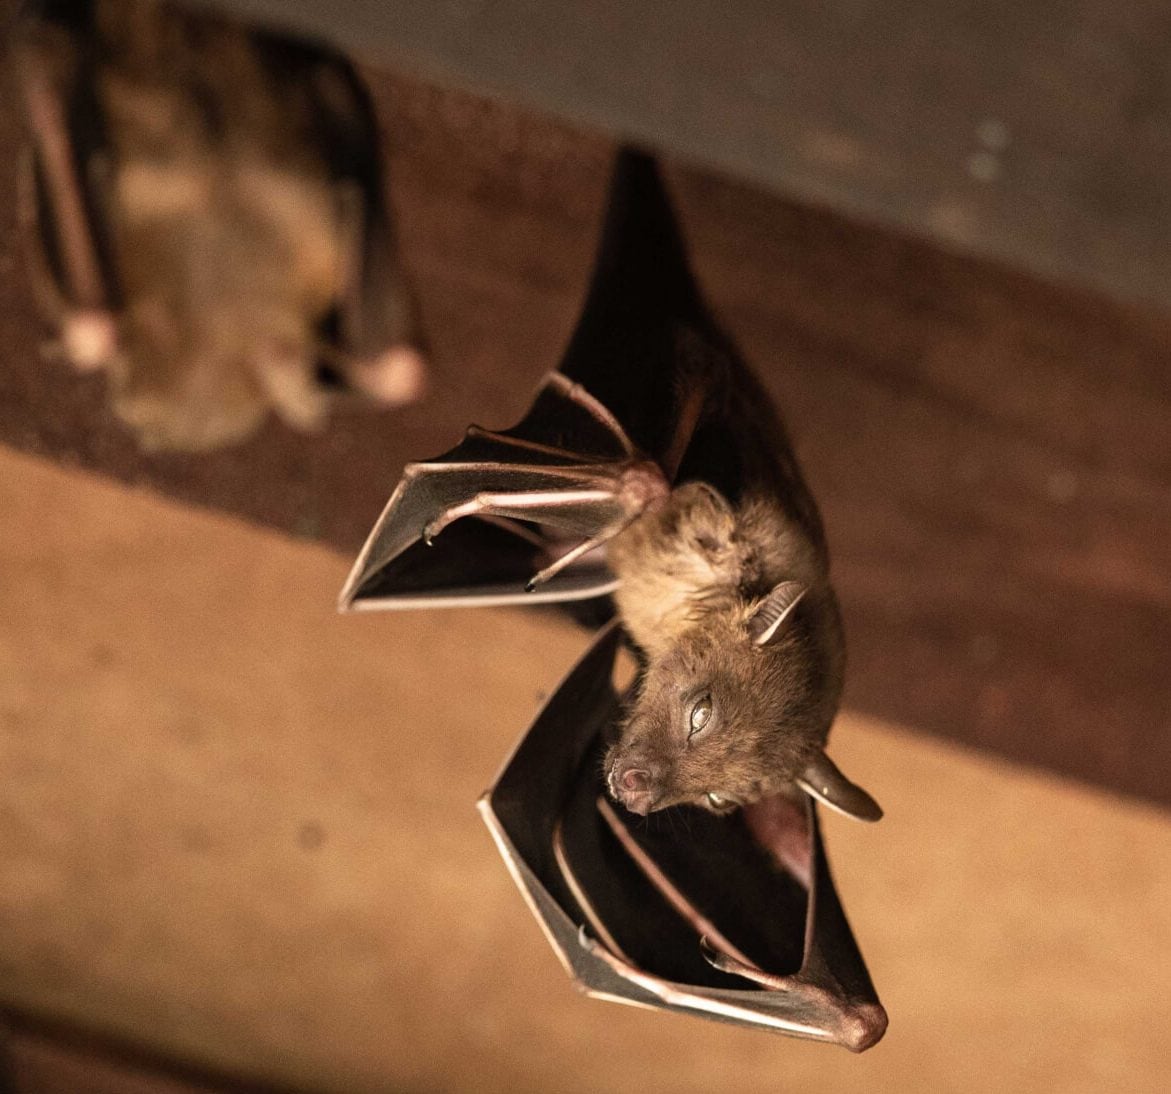 Expert bat removal services for a safe and humane solution in San Antonio